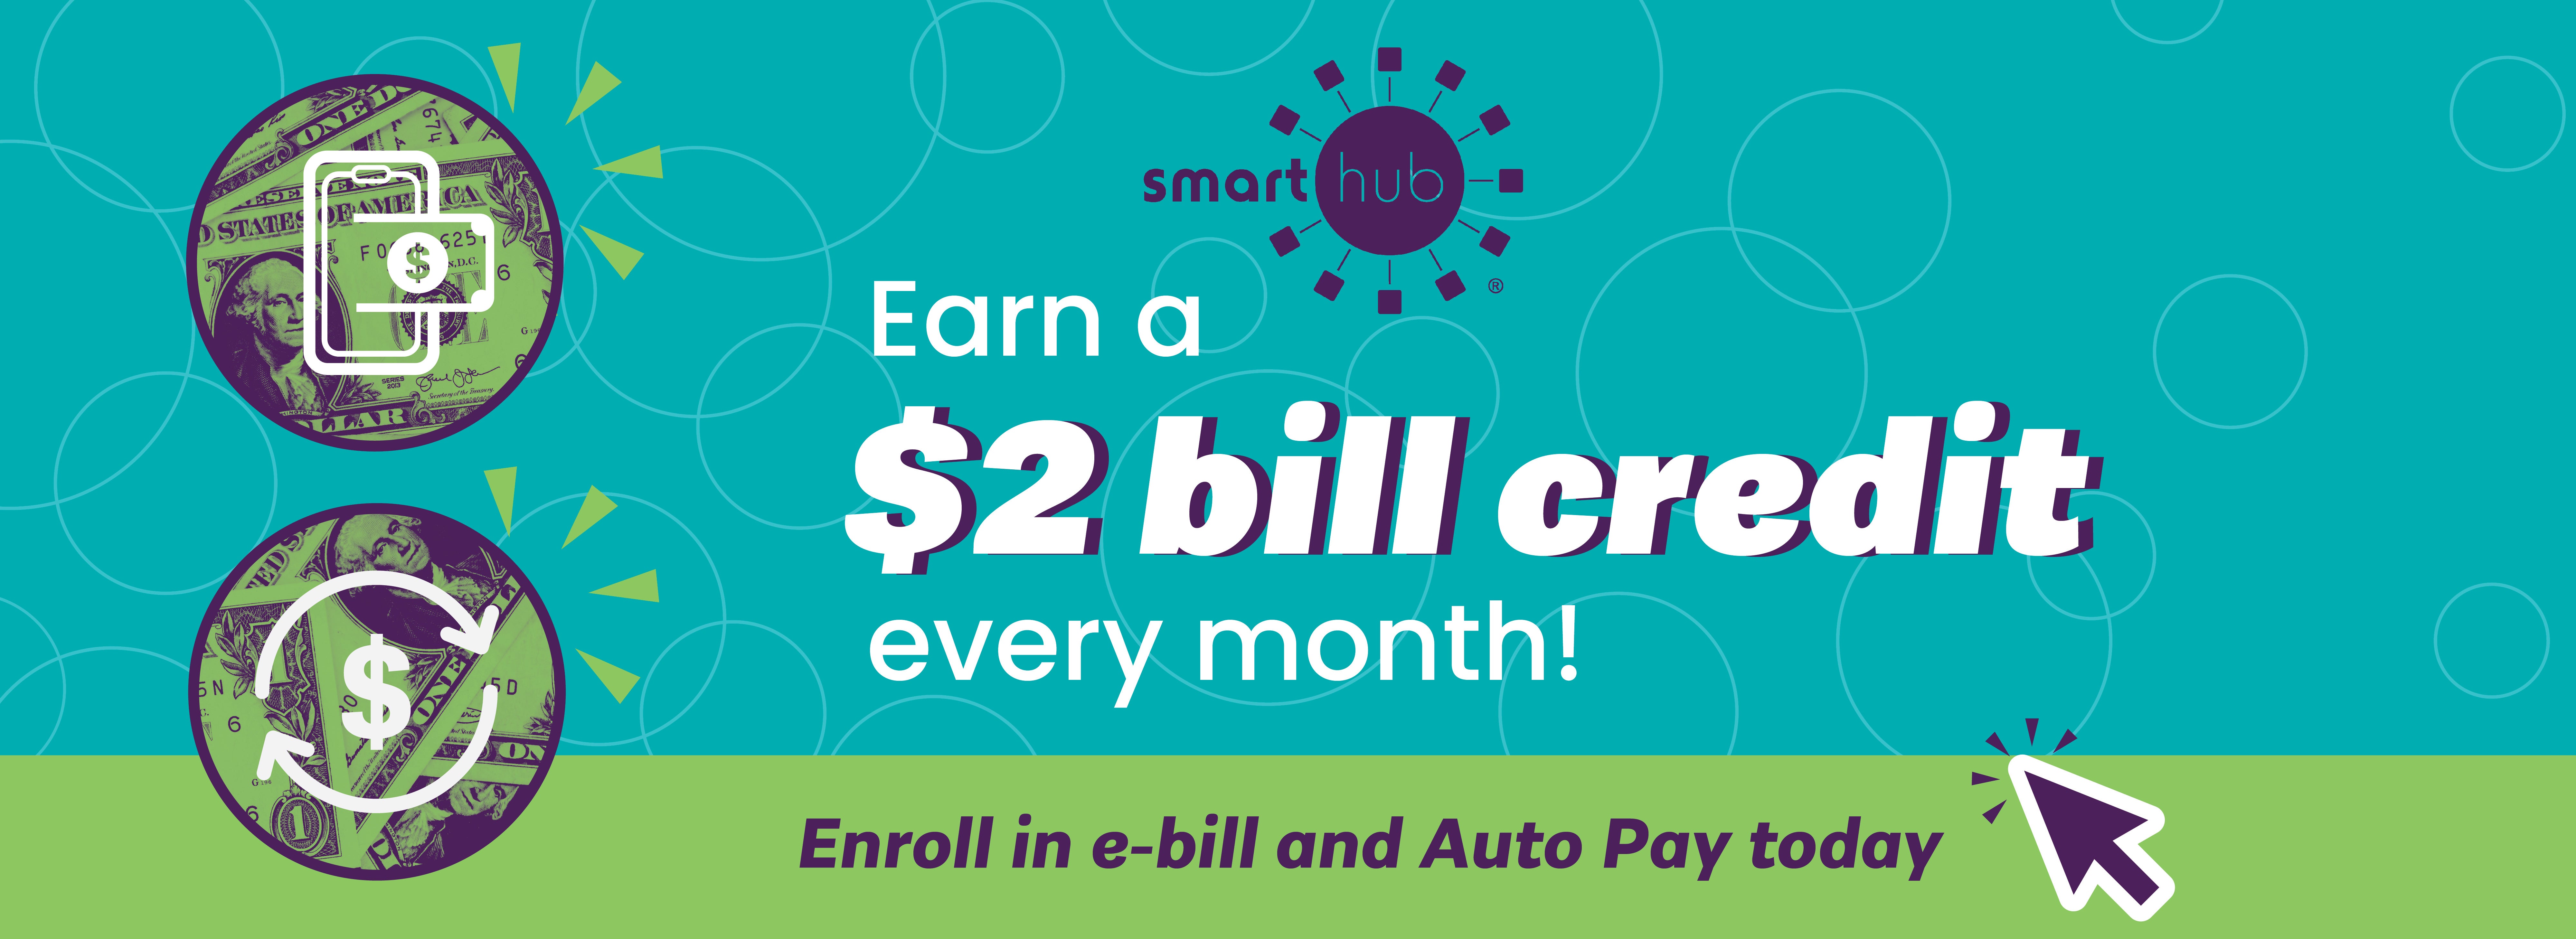 sign up and get a $2 bill credit promo